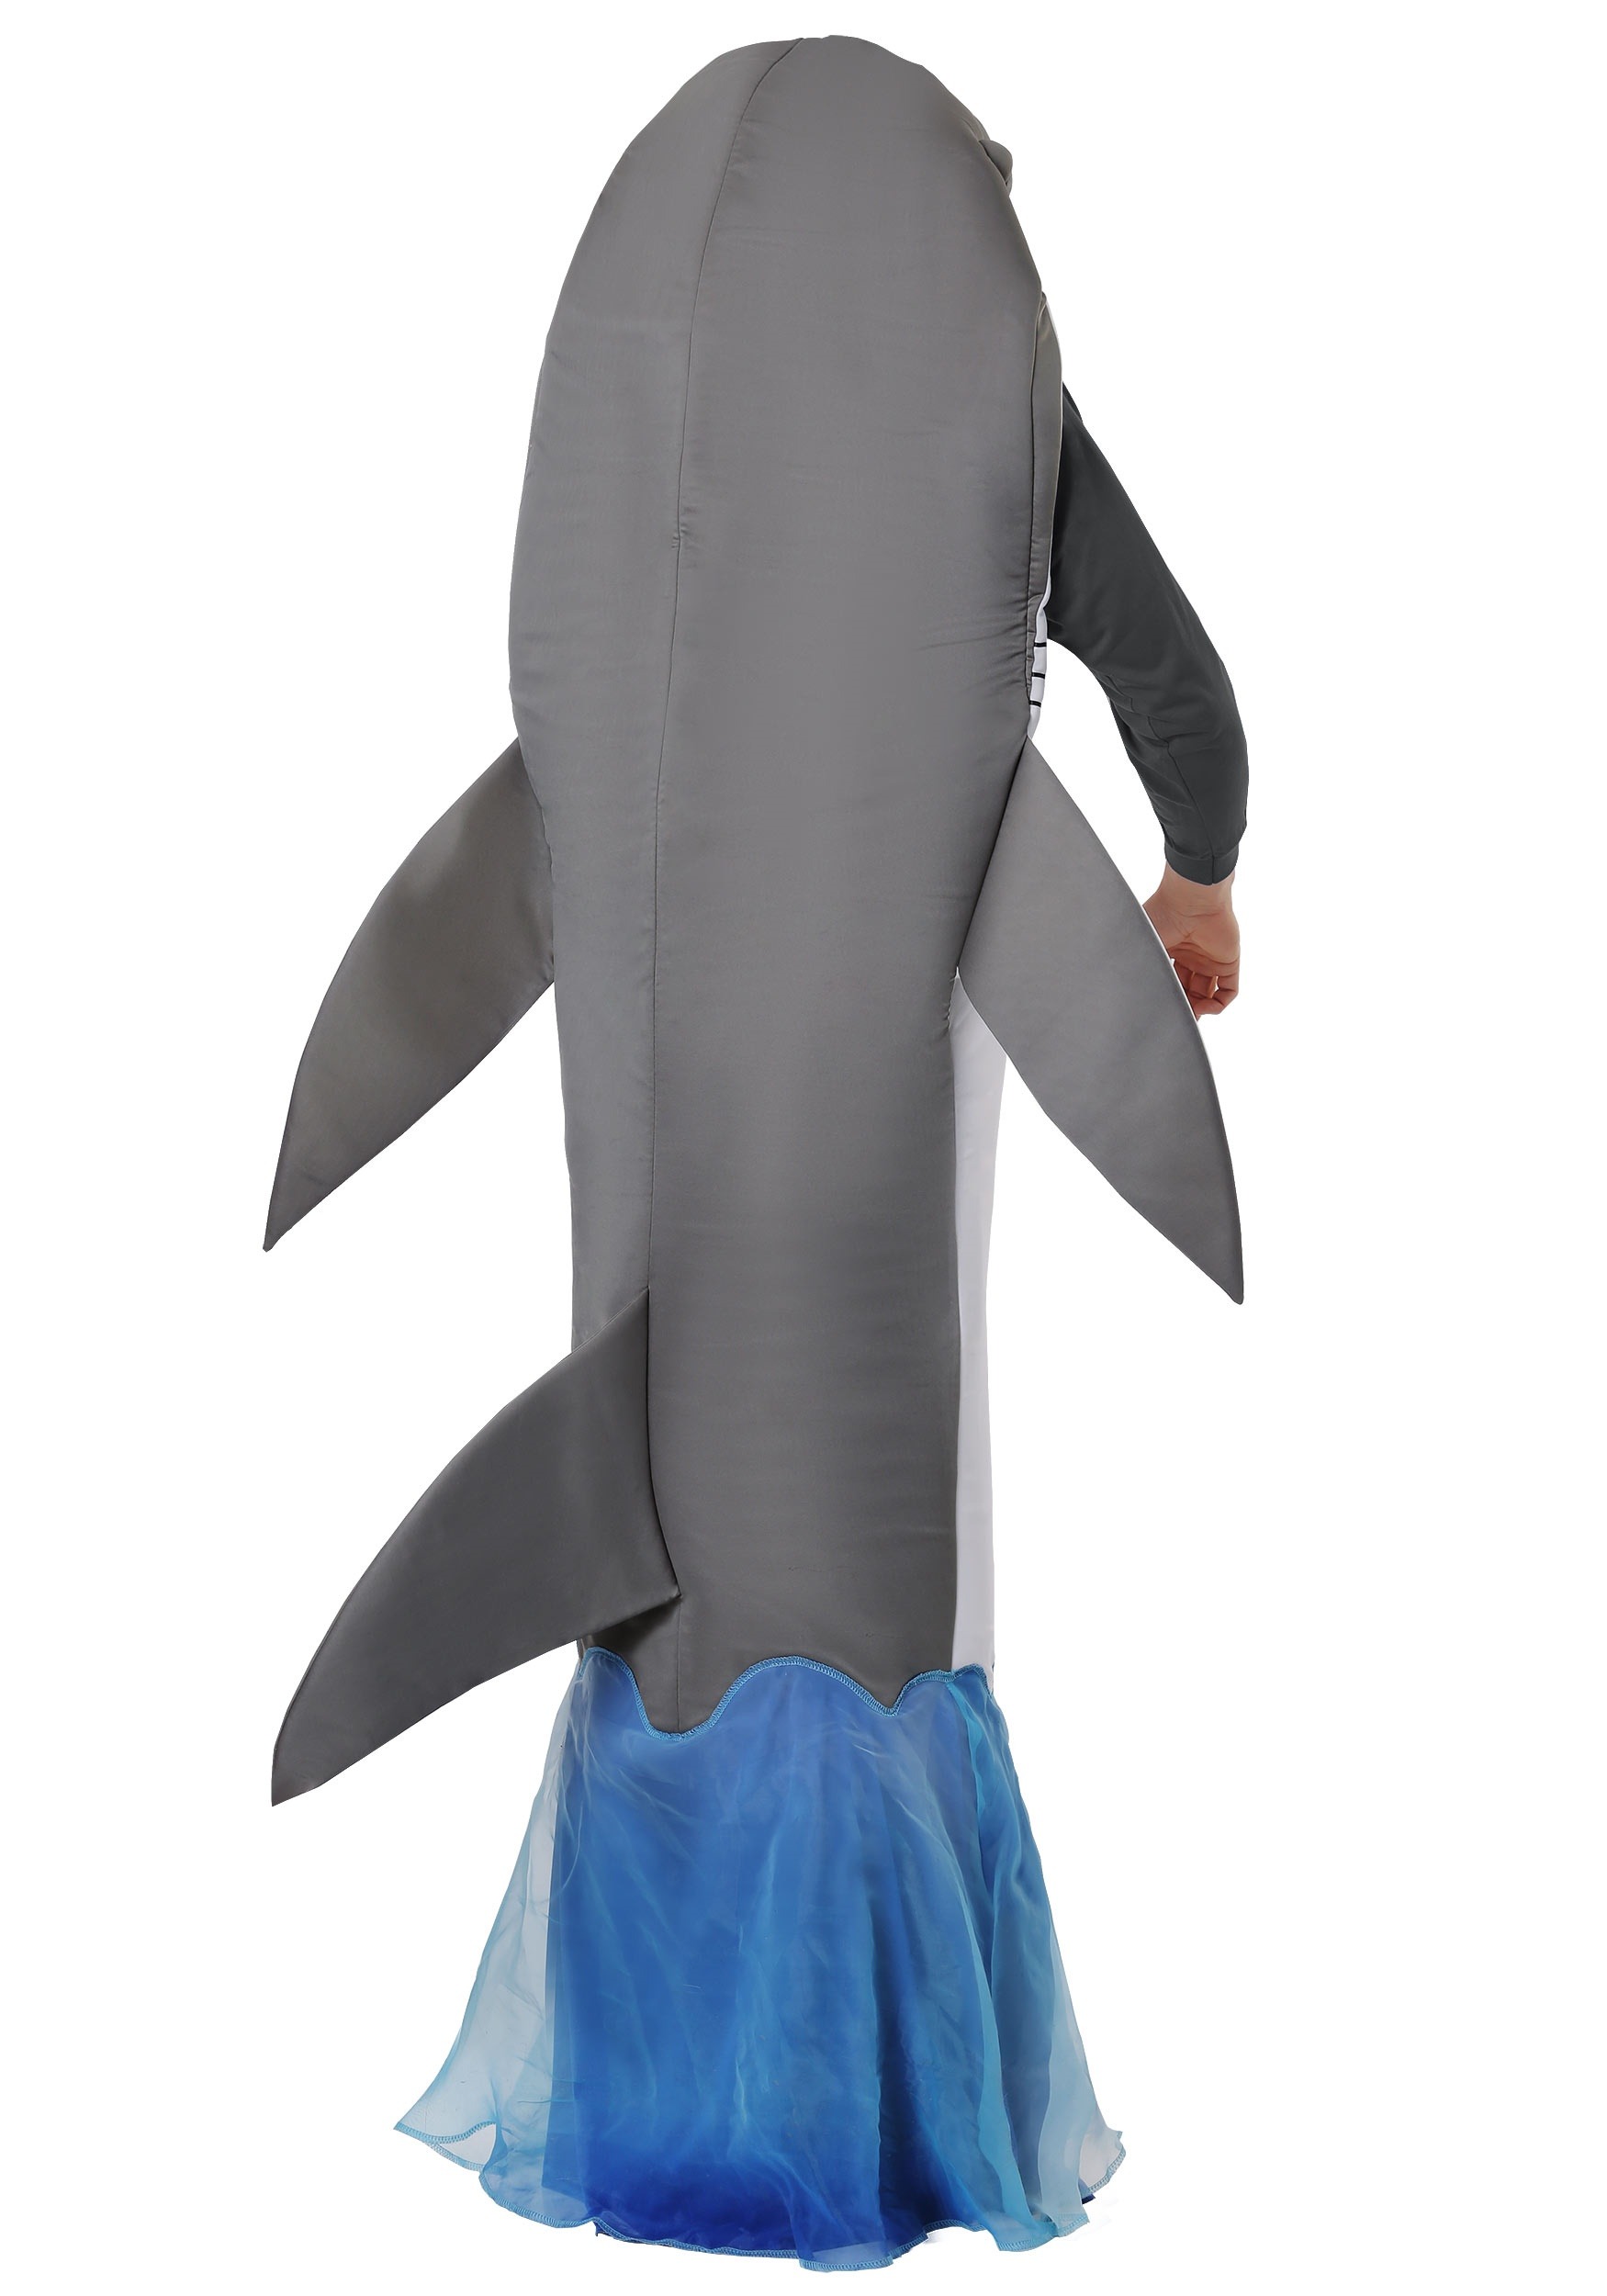 Shark Attack Costume For An Adult